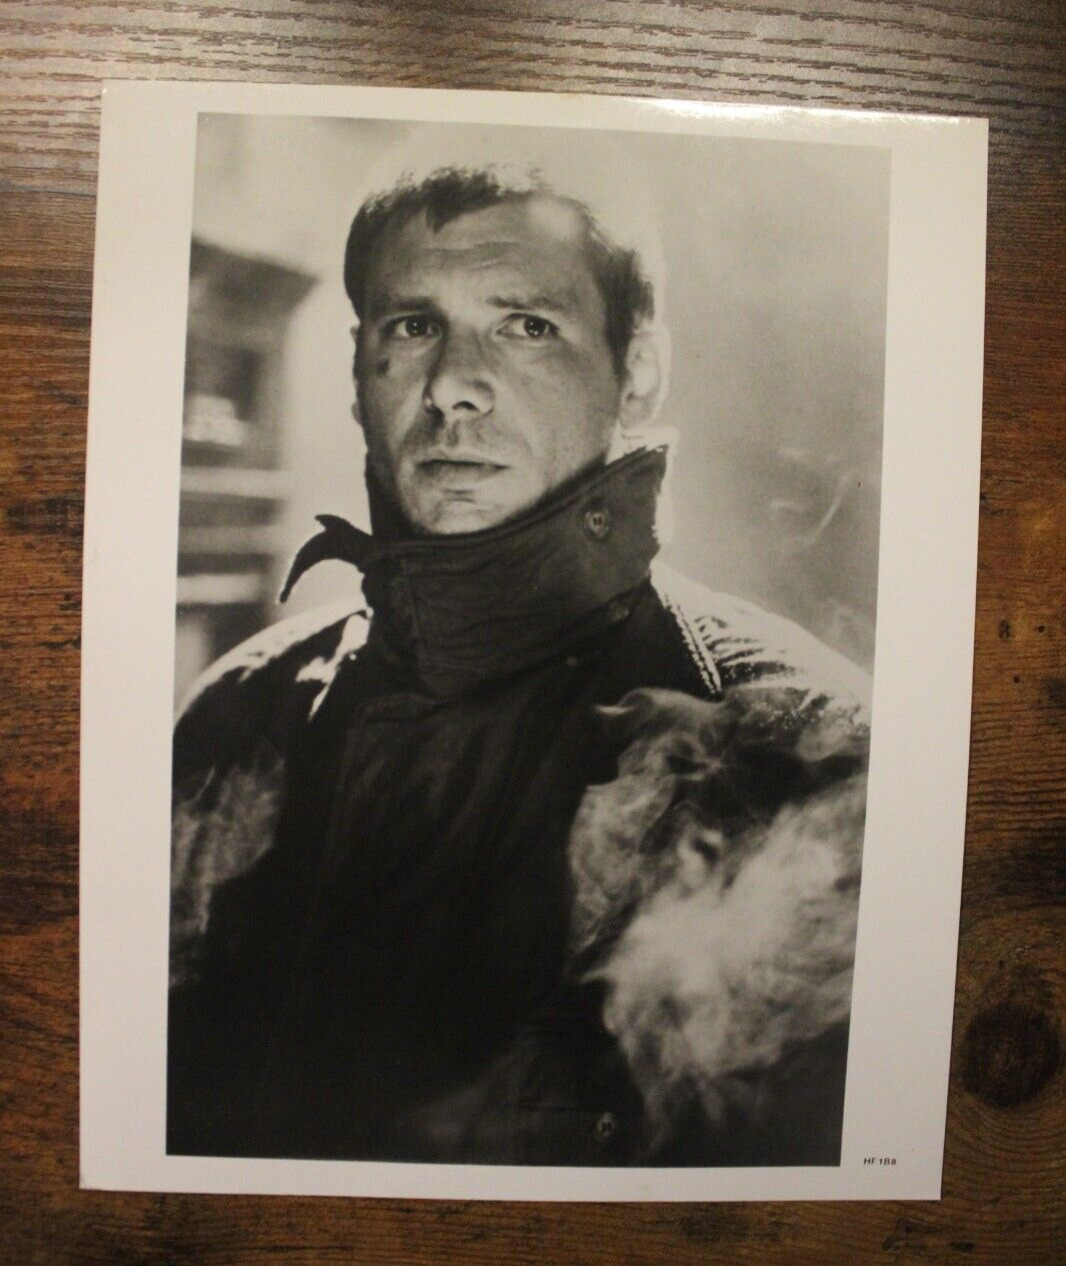 8x10 Blade Runner 1982 Glossy production photo print Harrison Ford